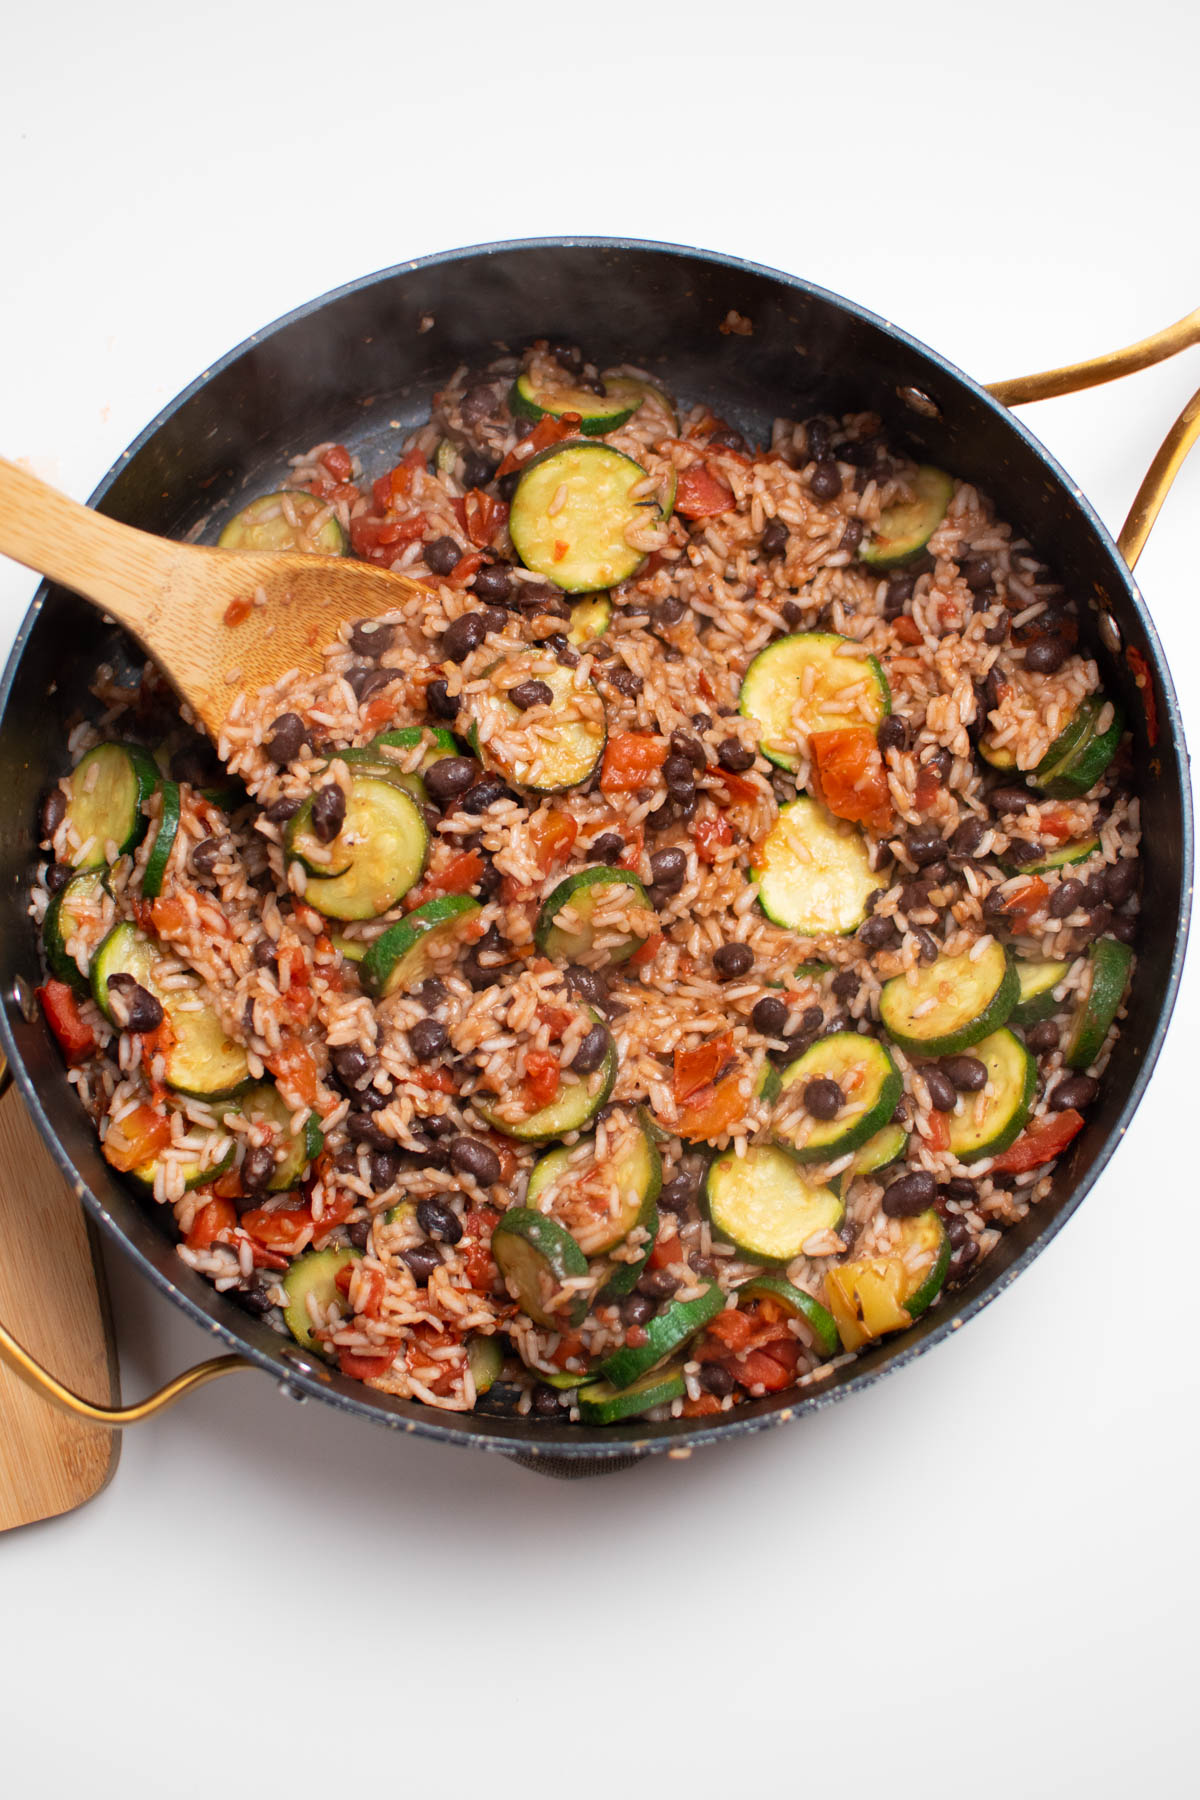 Zucchini, black beans, rice, and tomatoes in large black skillet with wooden spoon.